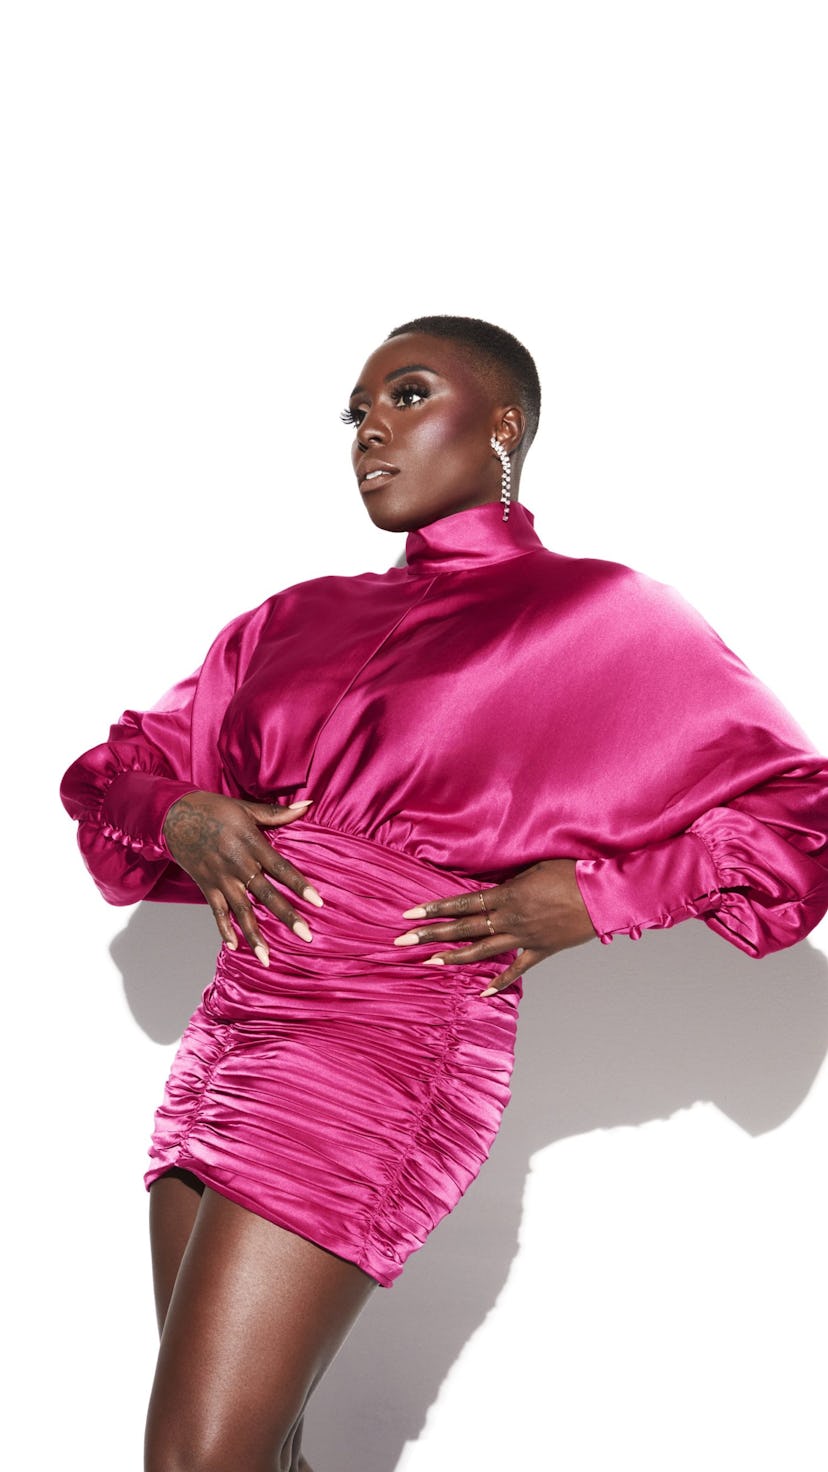 A portrait of Laura Mvula in a pink satin dress.